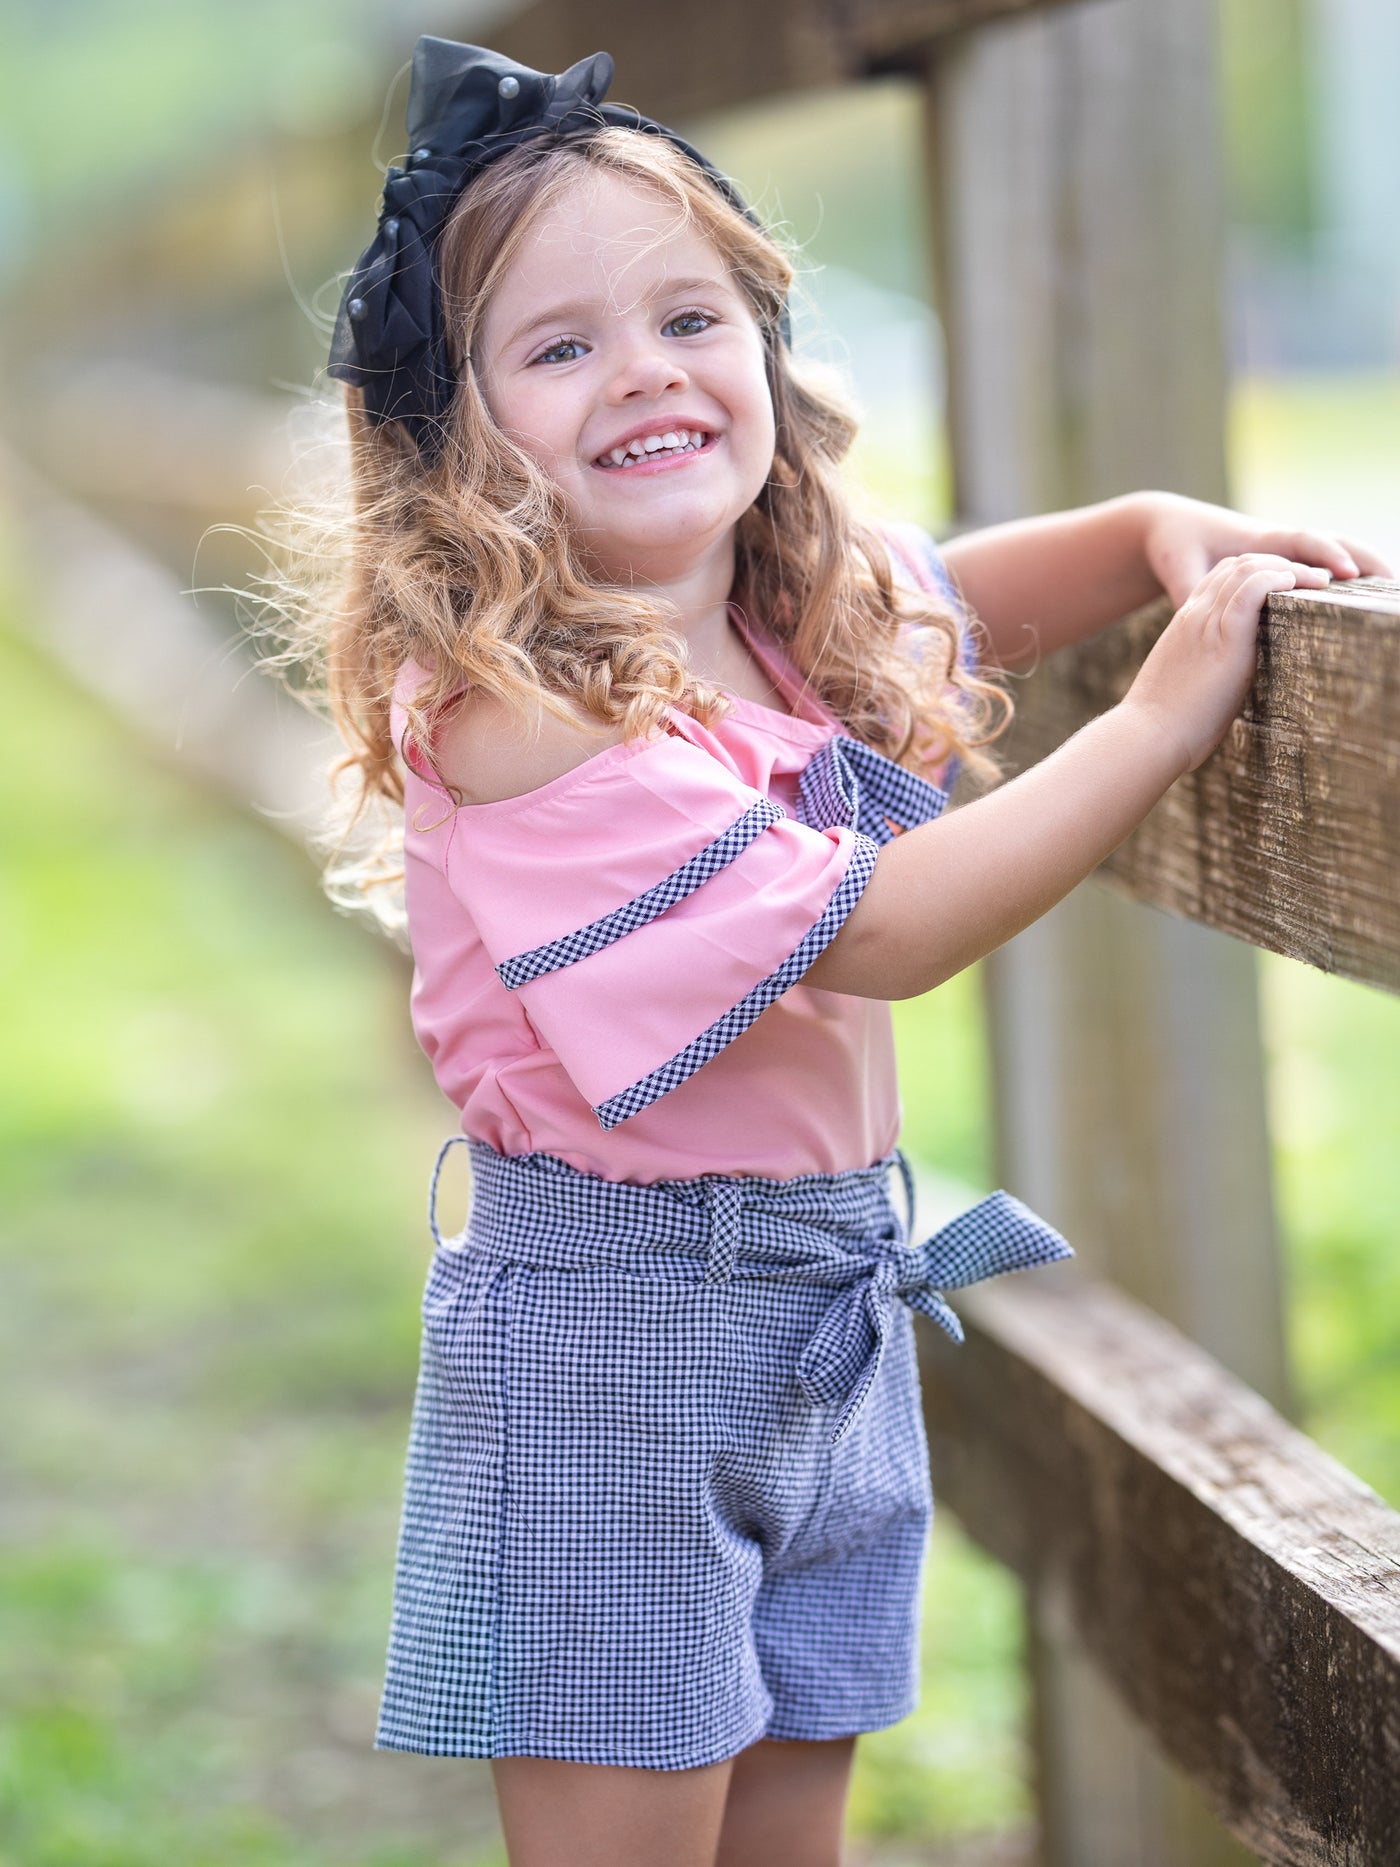 girls pink top with grey bow and matching grey shorts with sash